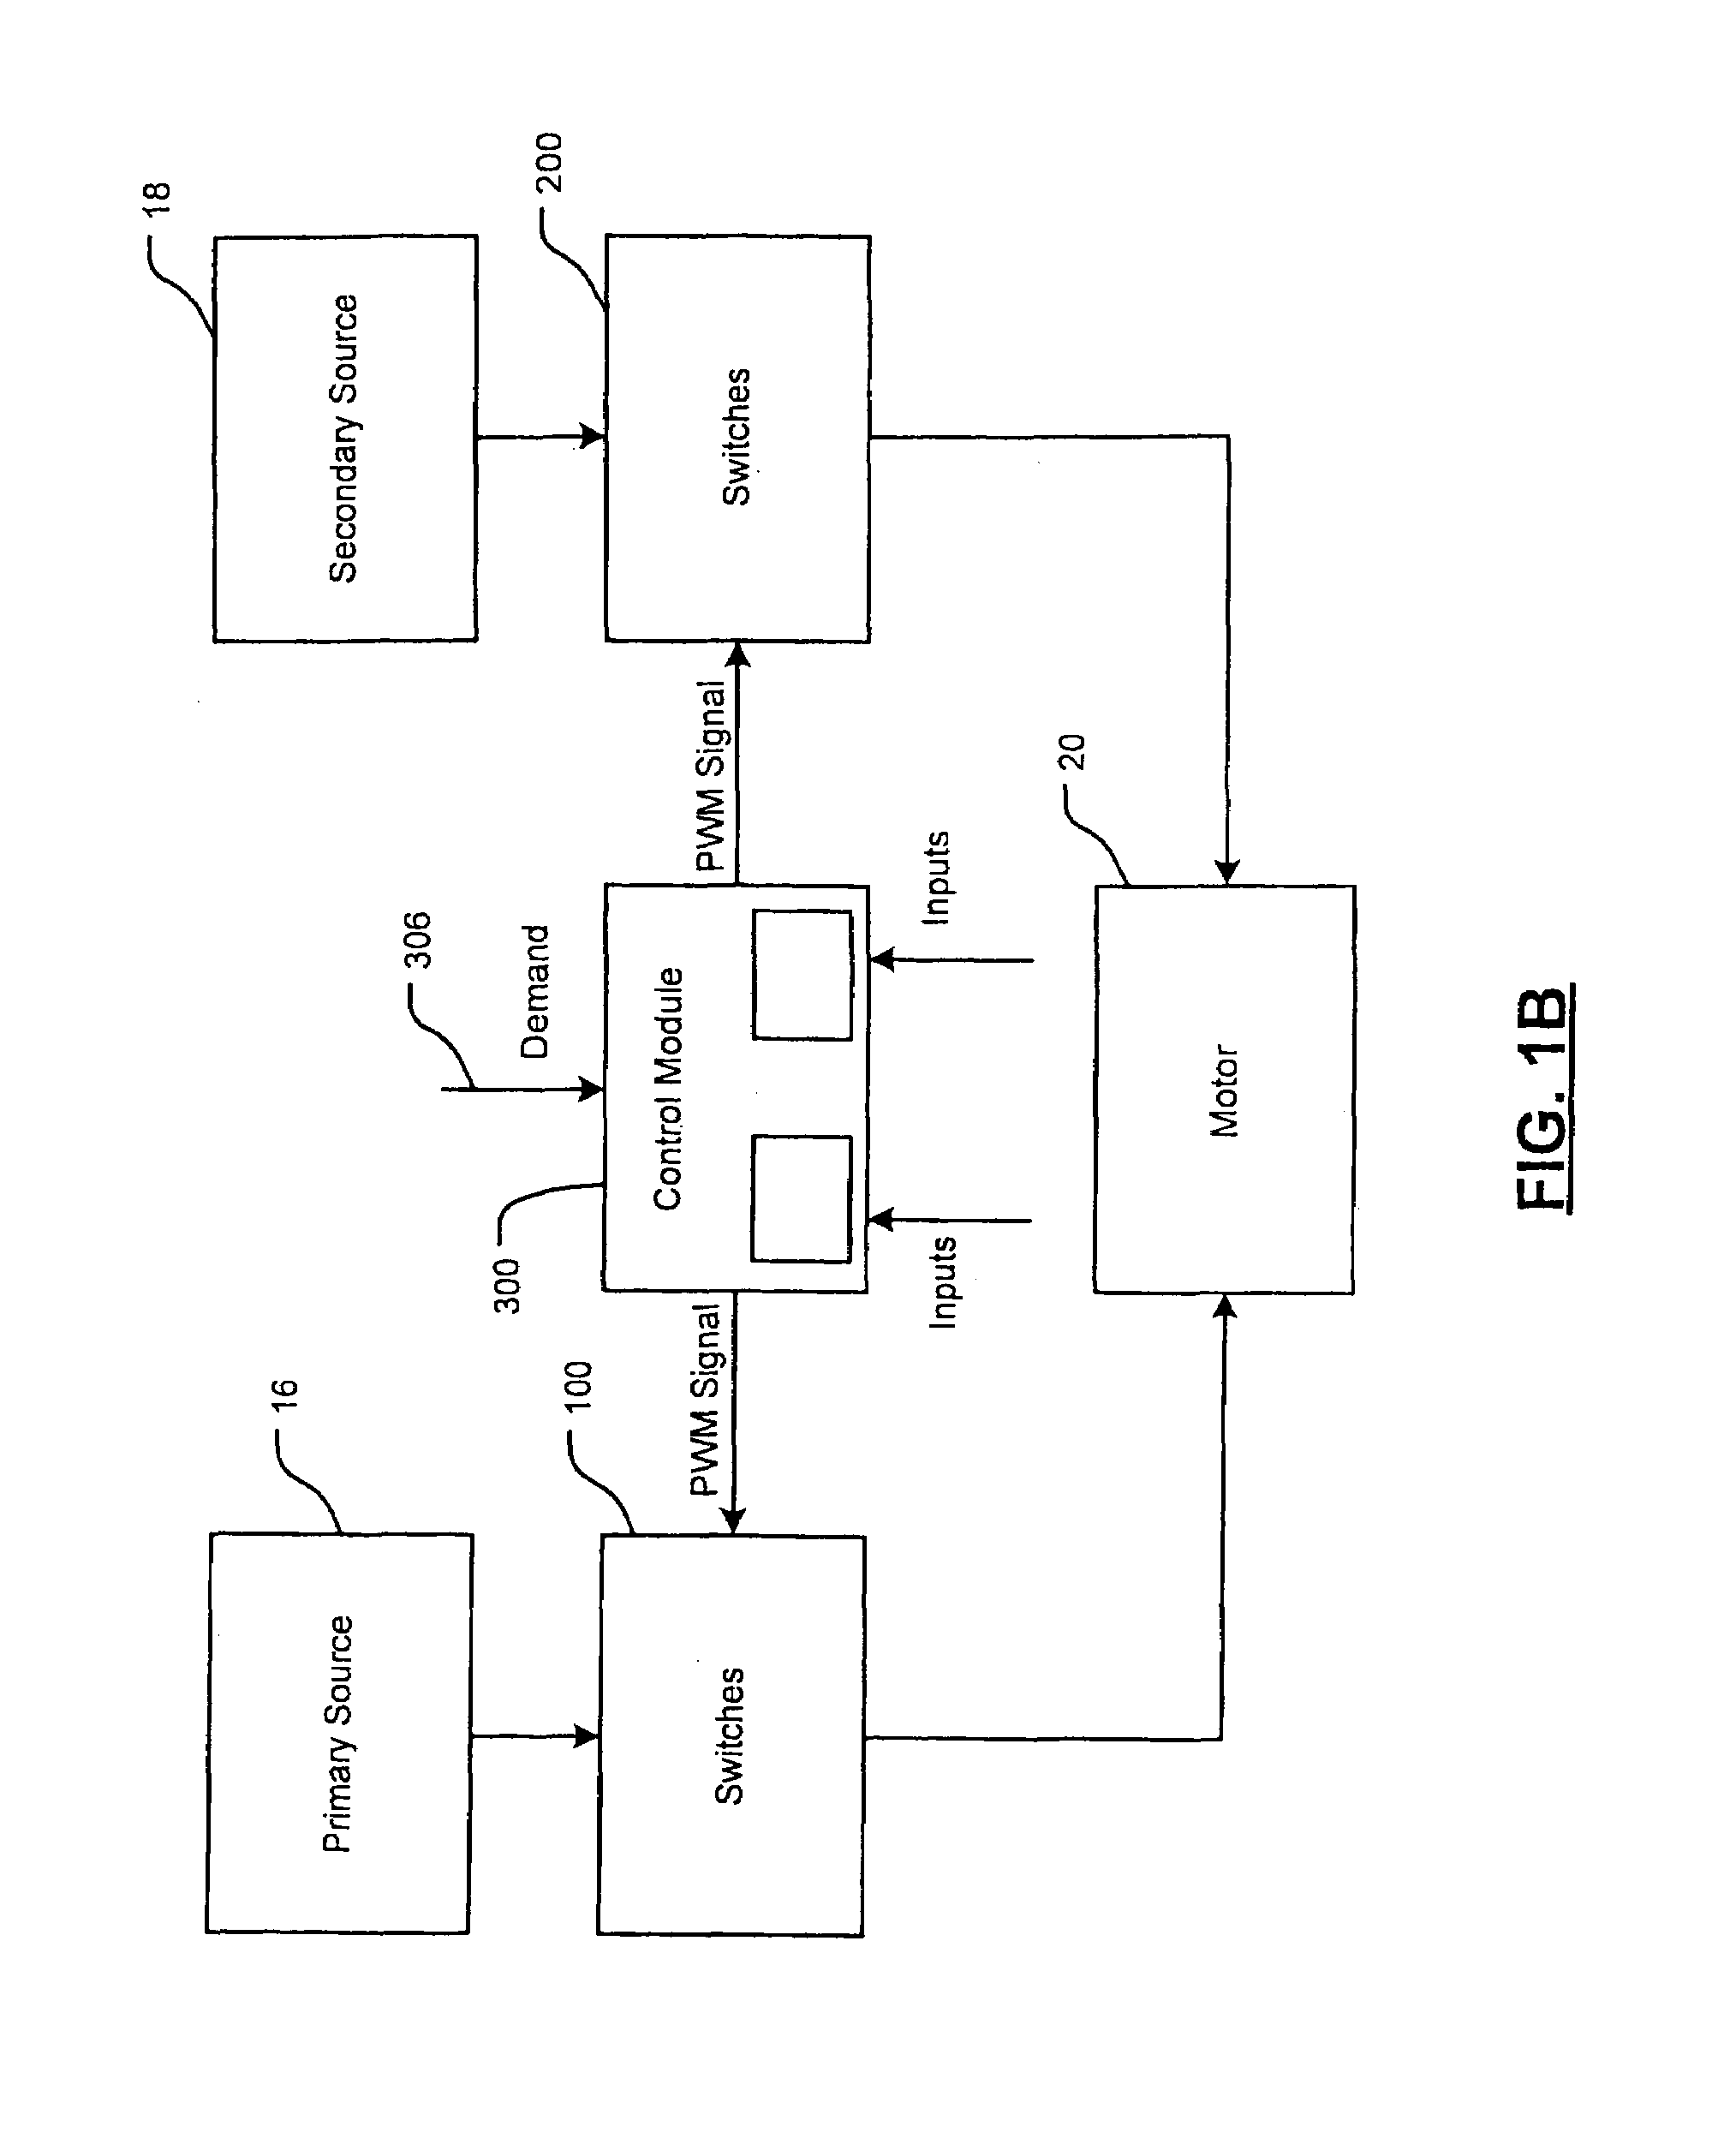 Unified power control method of double-ended inverter drive systems for hybrid vehicles